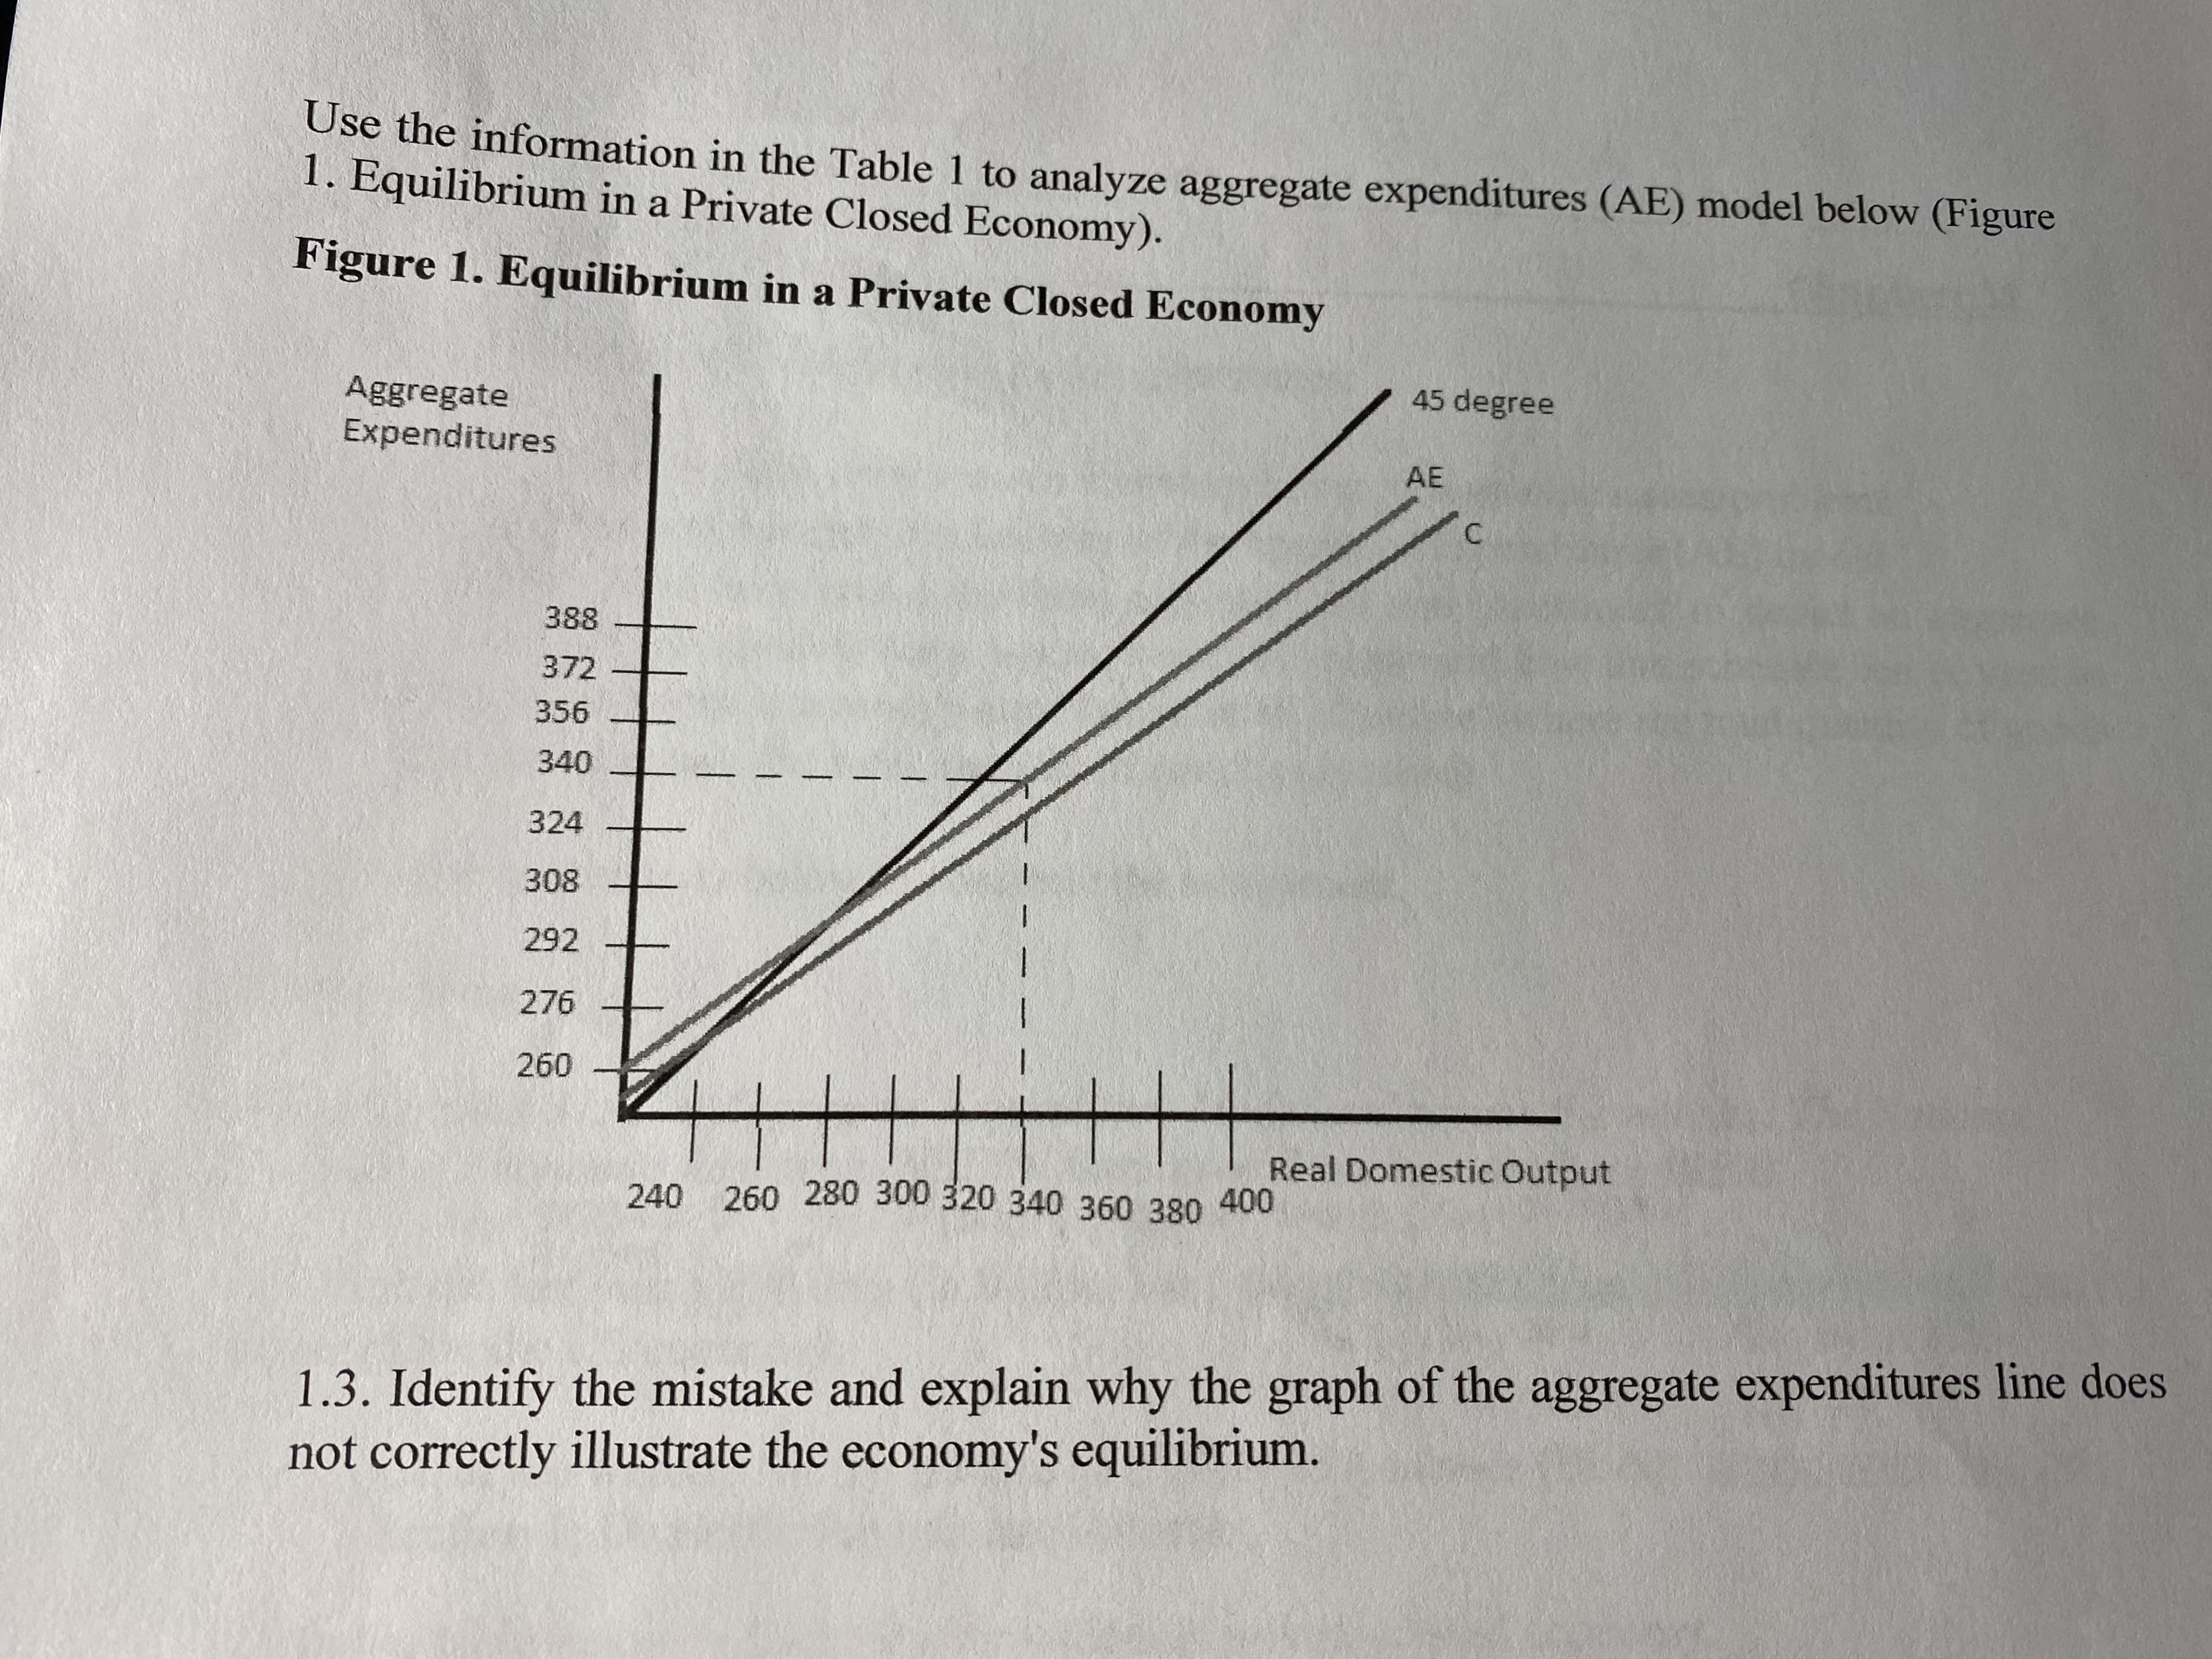 1.3. Identify the mistake and explain why the graph of the aggregate expenditures line does
not correctly illustrate the economy's equilibrium.
